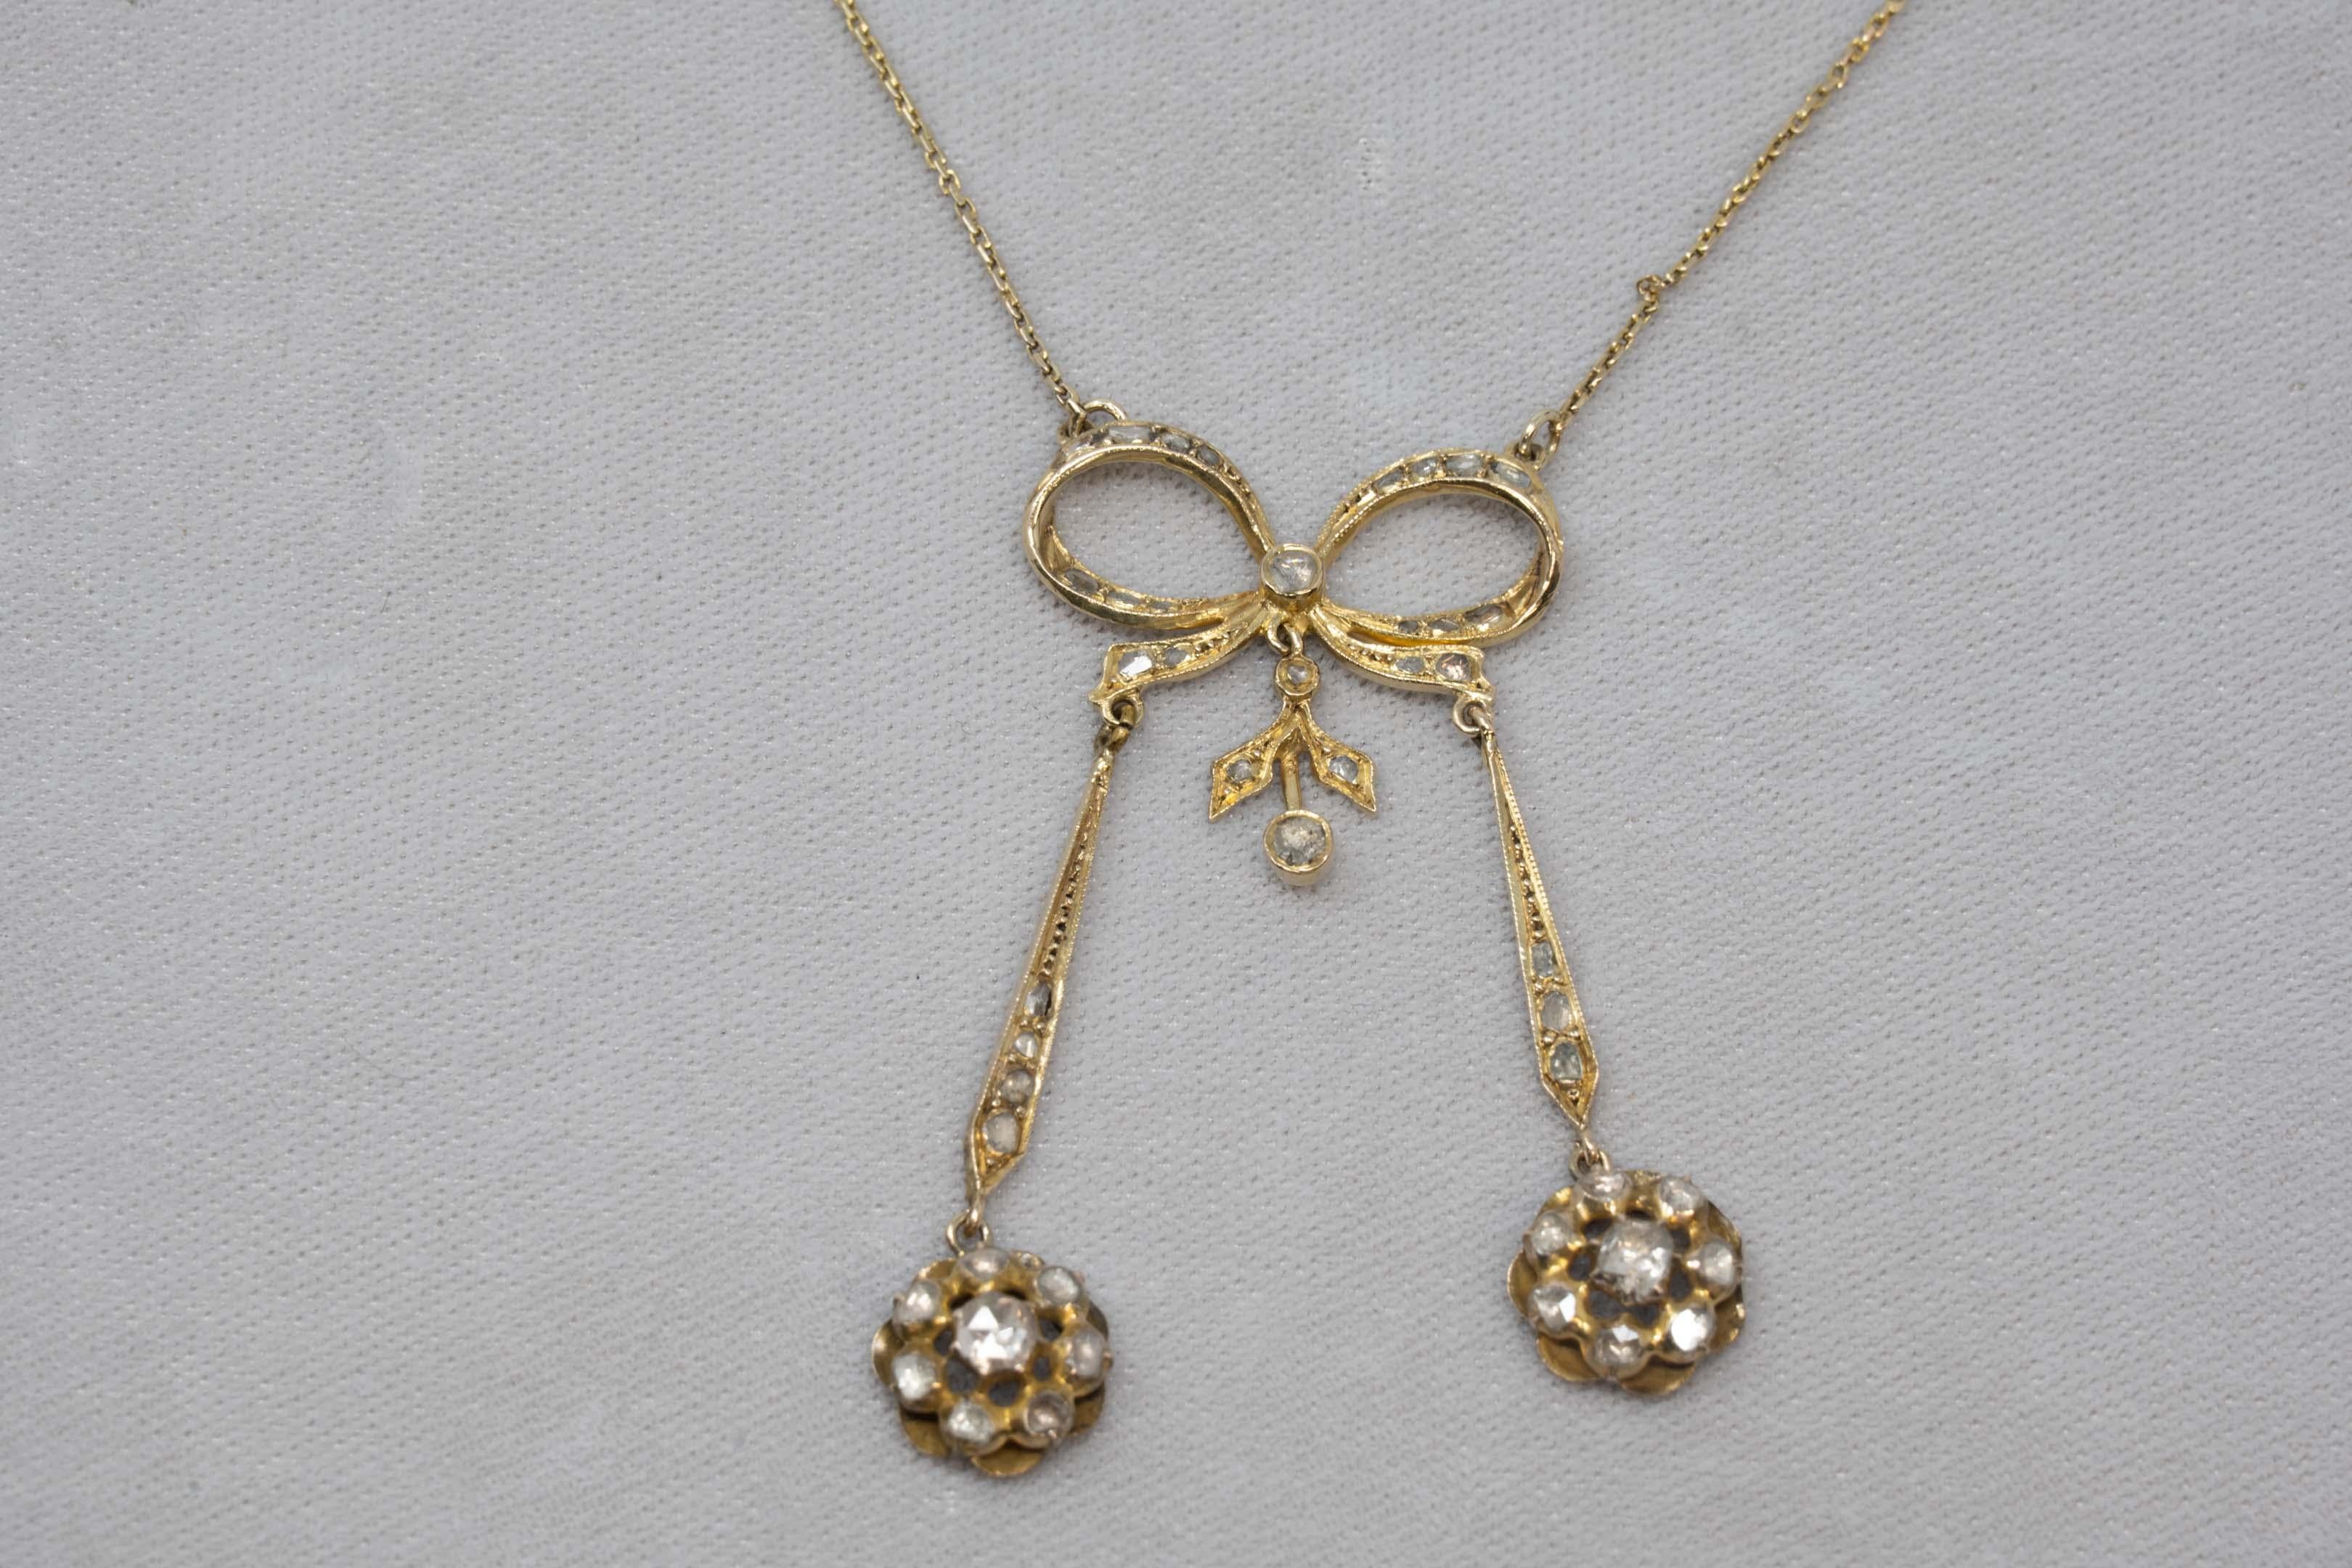 14k gold necklace set with 47 mine cut diamonds, stamped on the lock and acid tested. The chain measures 14 inches long and the buckle pendant measures 2 1/4 inches circa 1900. Weighs 11.4 grams.